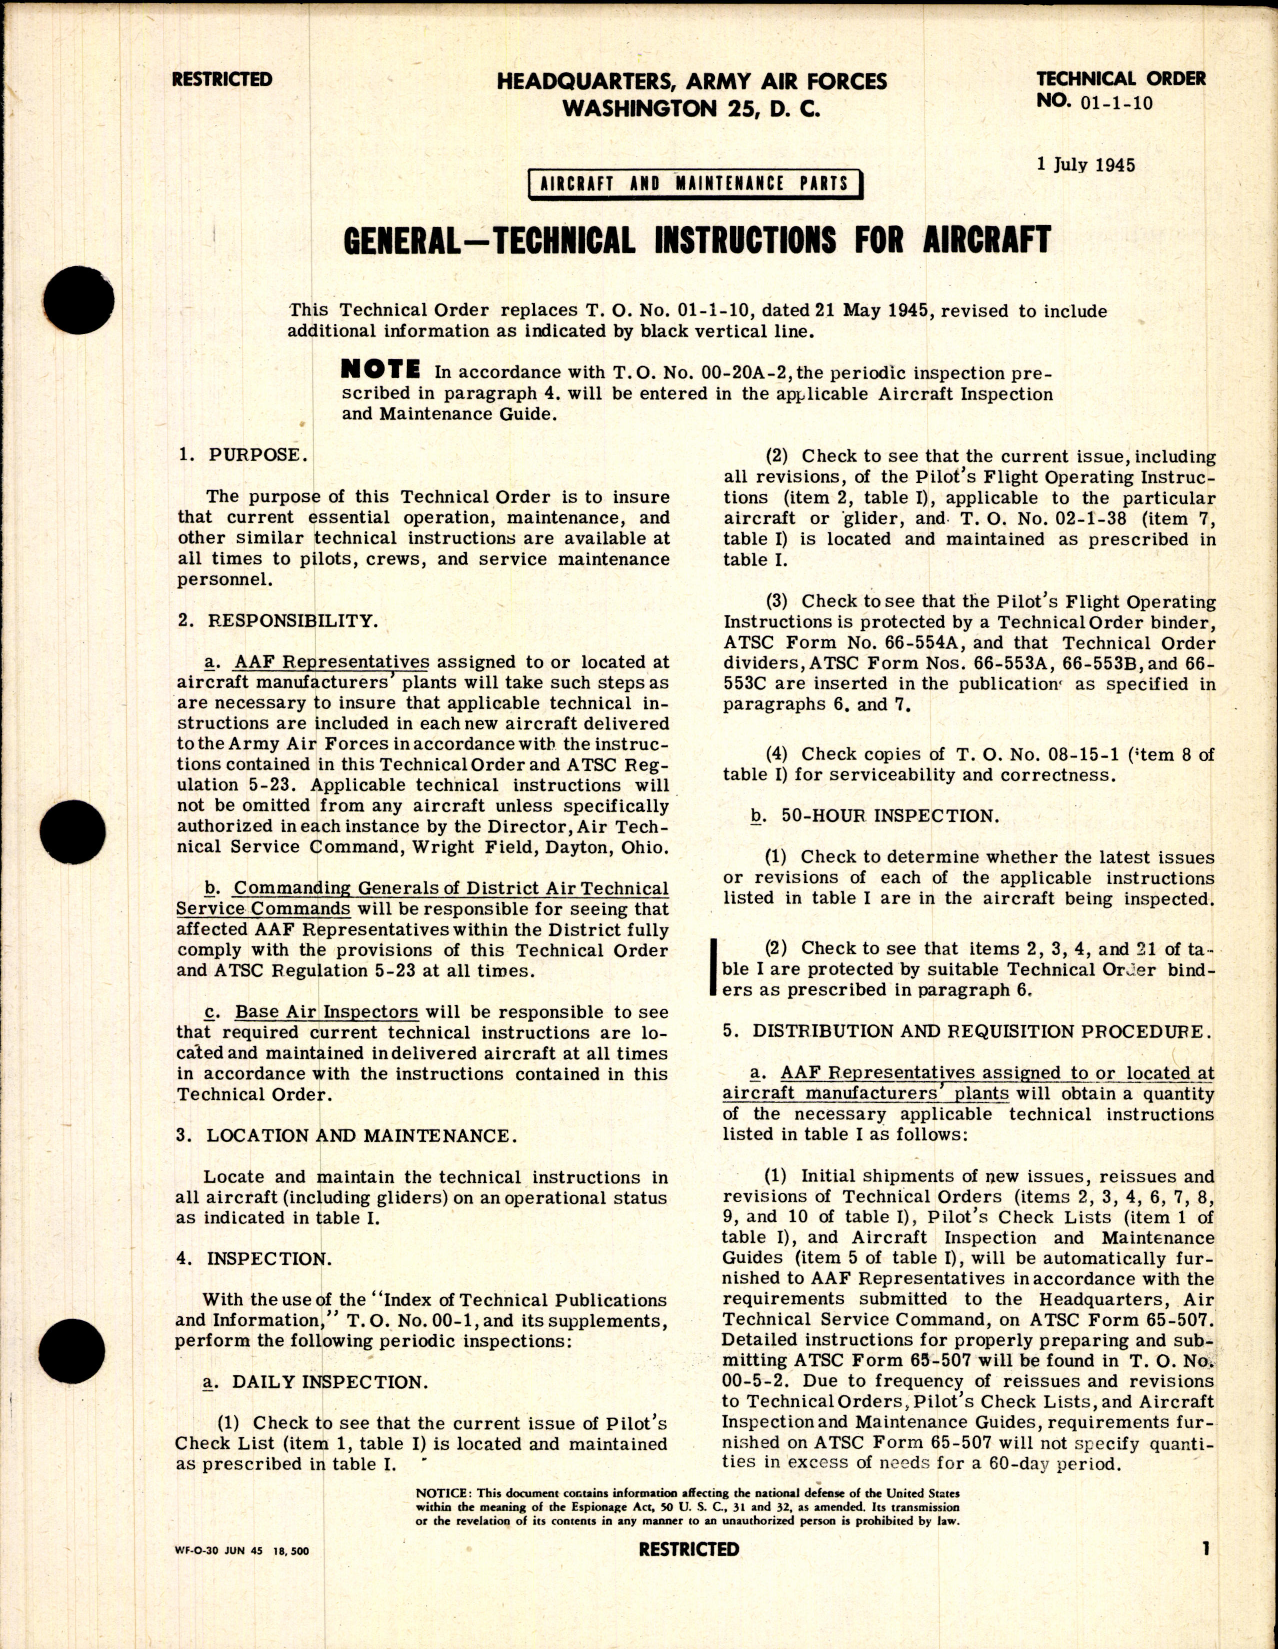 Sample page 1 from AirCorps Library document: Aircraft and Maintenance Parts for Technical Aircraft Instructions